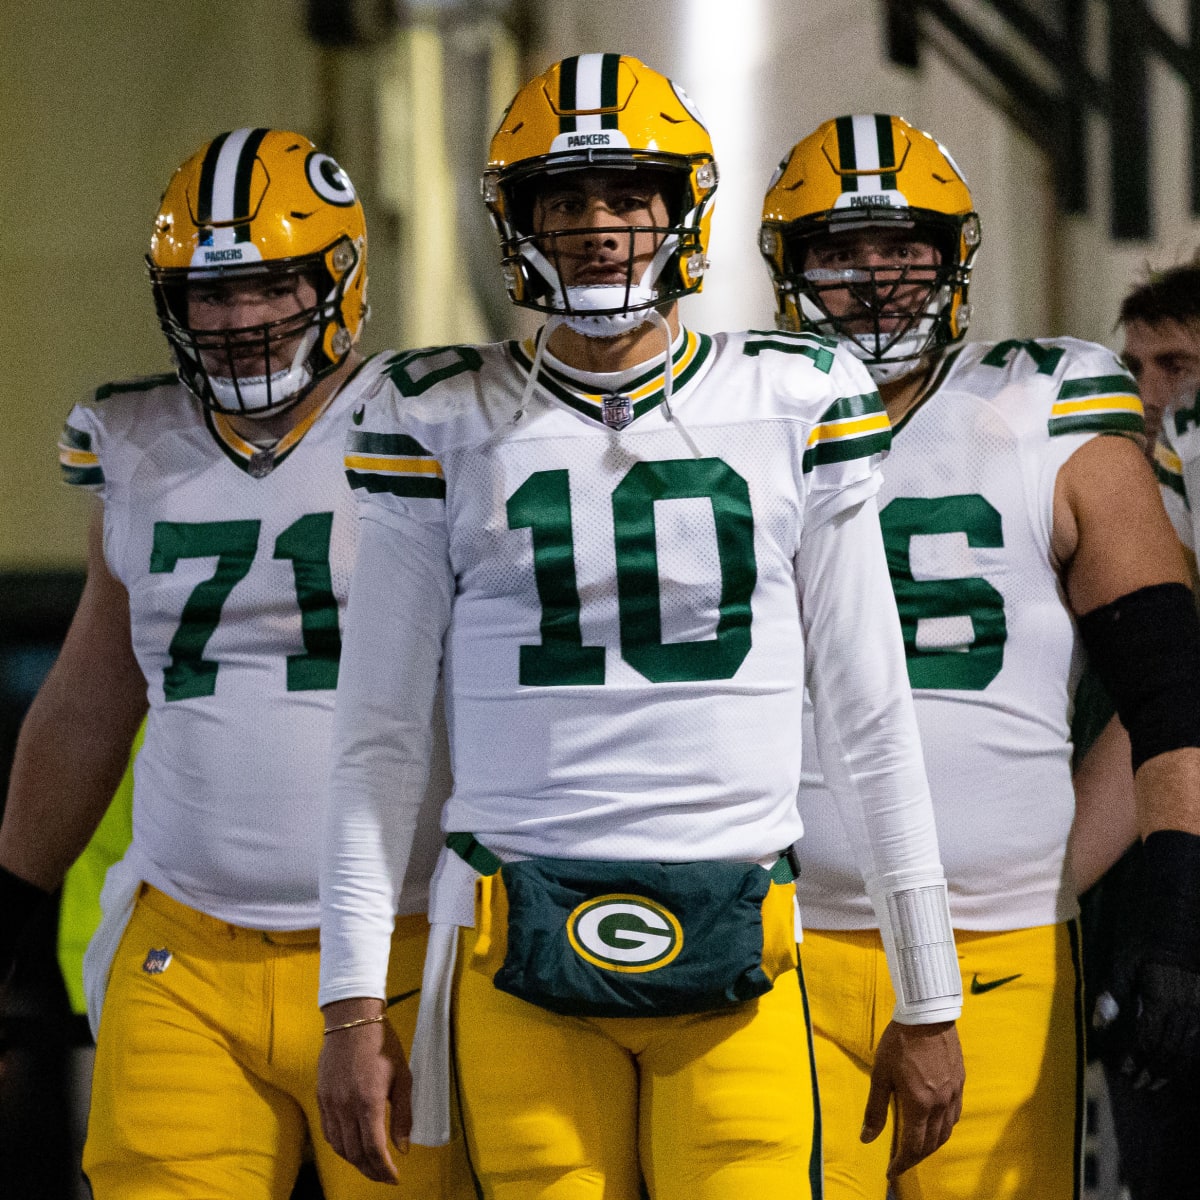 packers yellow uniforms